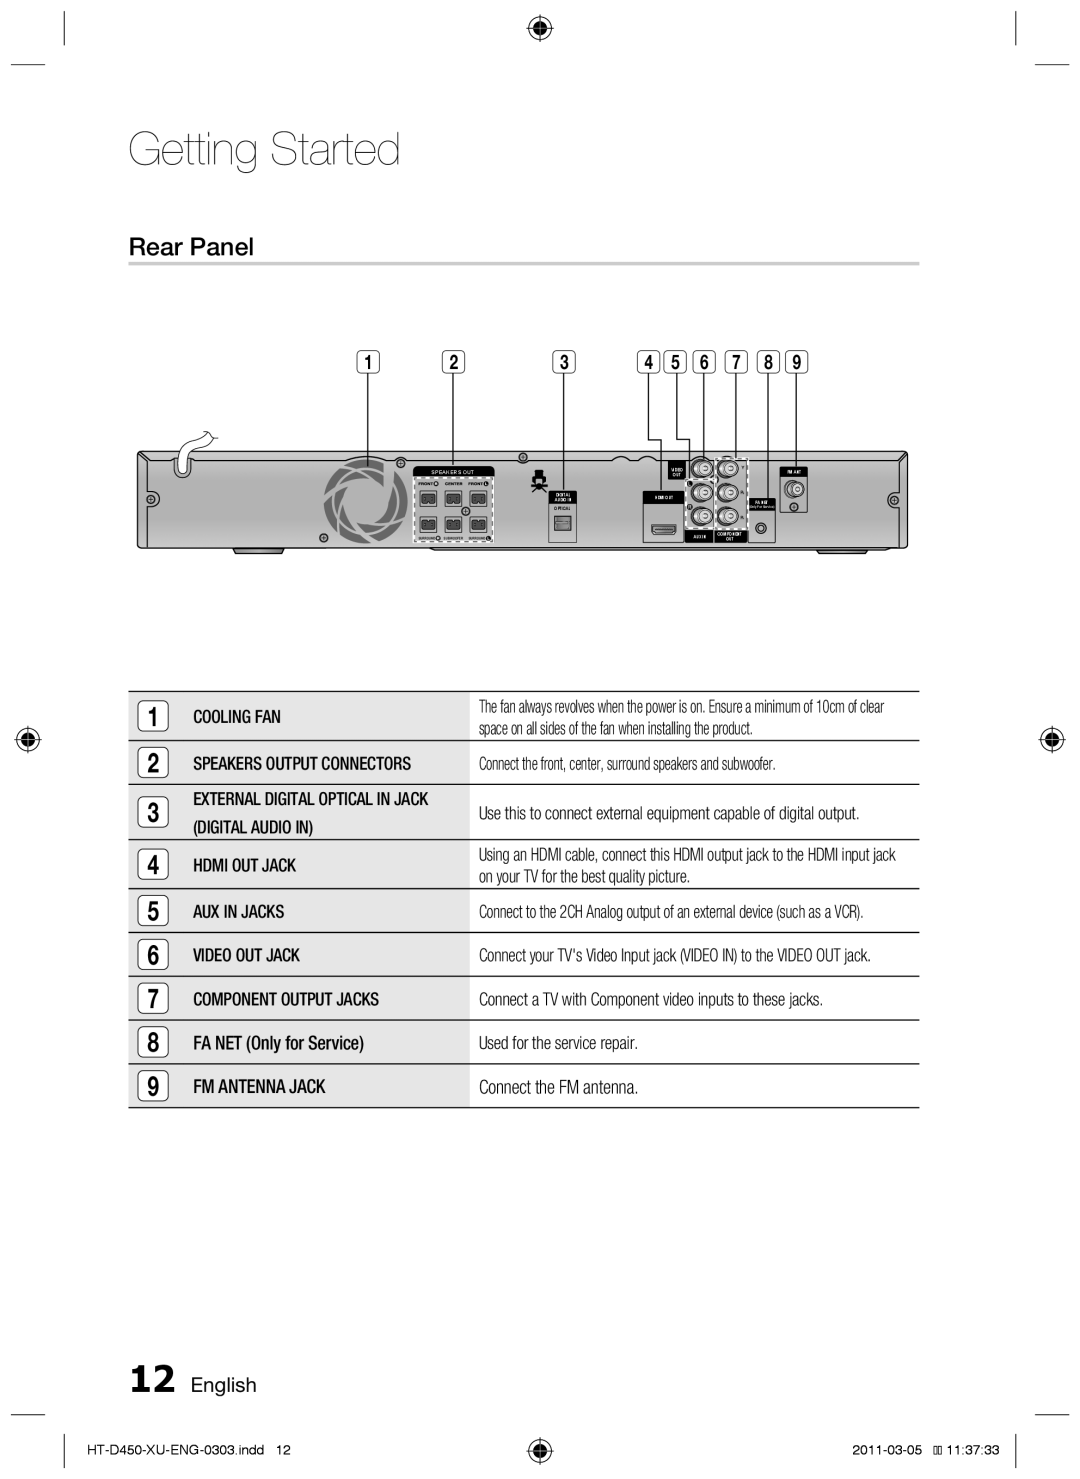 Samsung HT-D450, HT-D455, HT-D453 user manual Rear Panel, English, Getting Started 